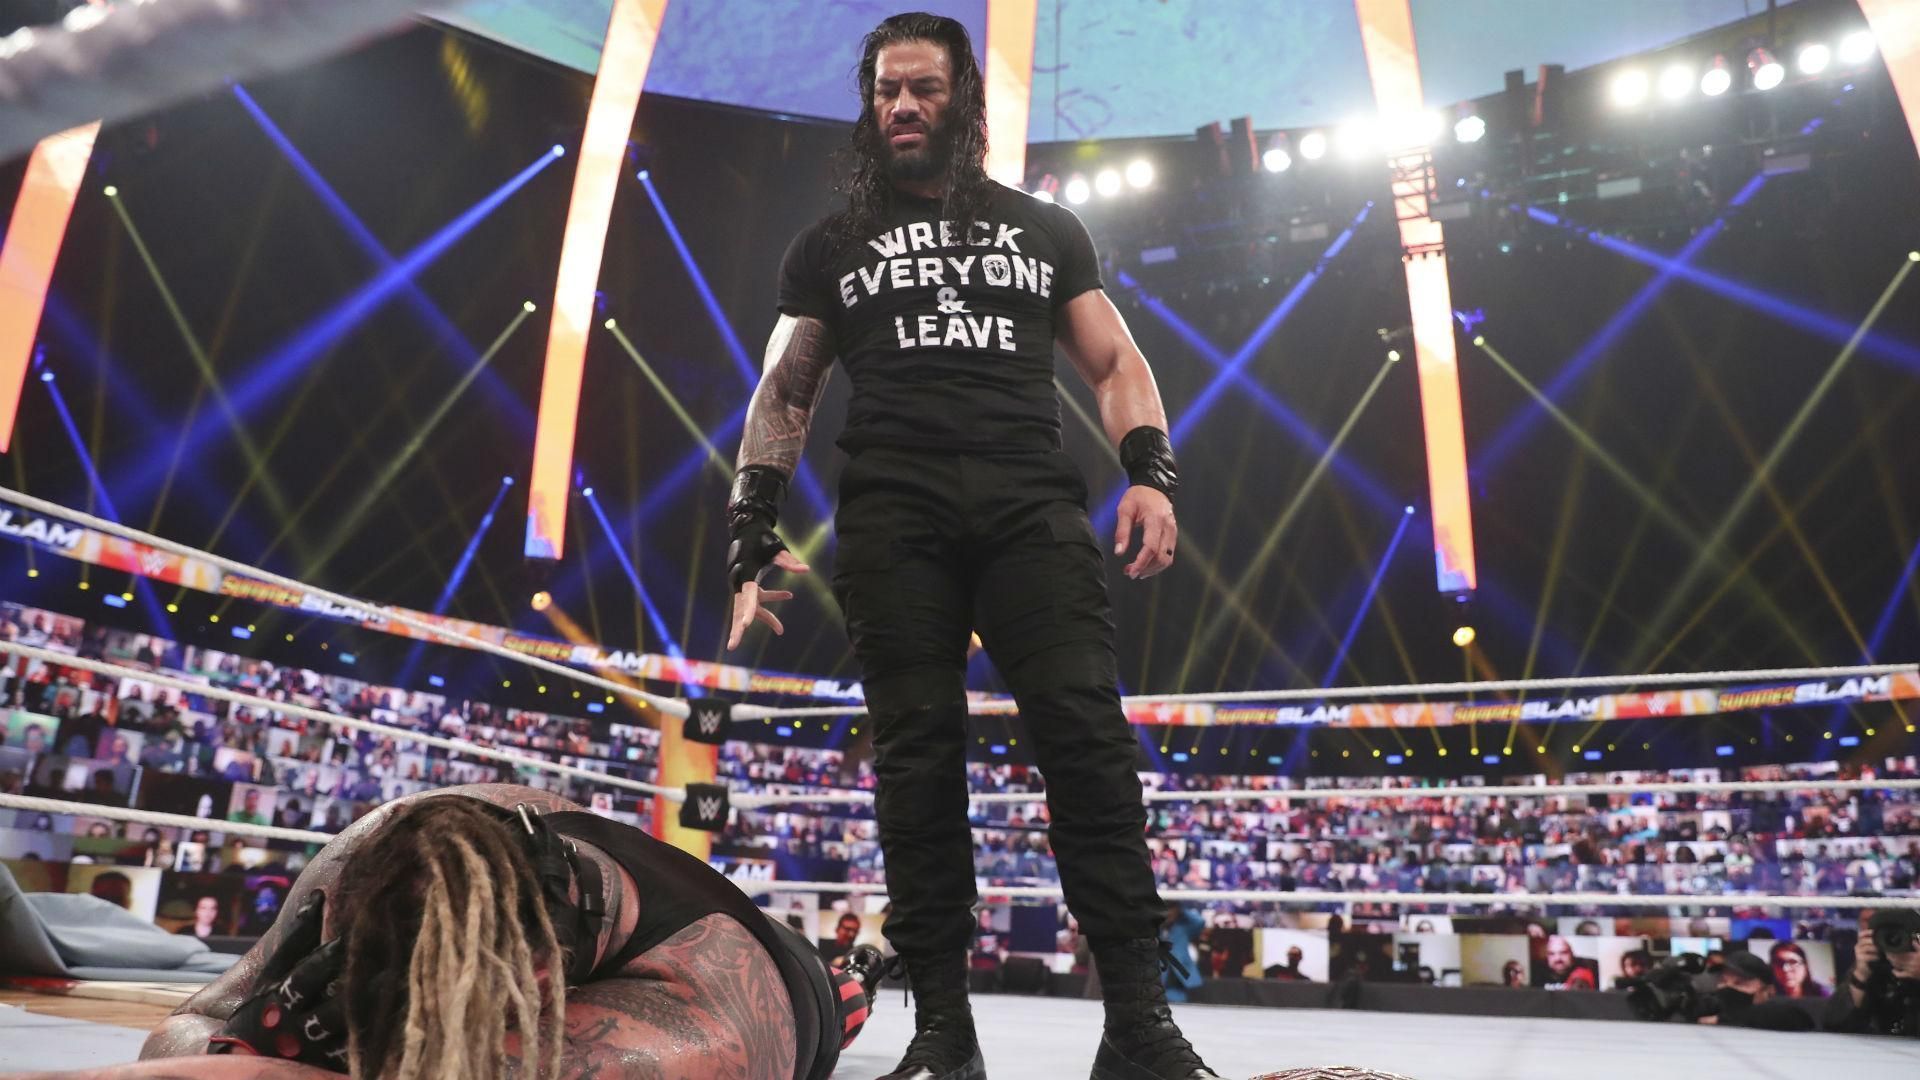 Roman Reigns shockingly re-emerged at SummerSlam 2020.